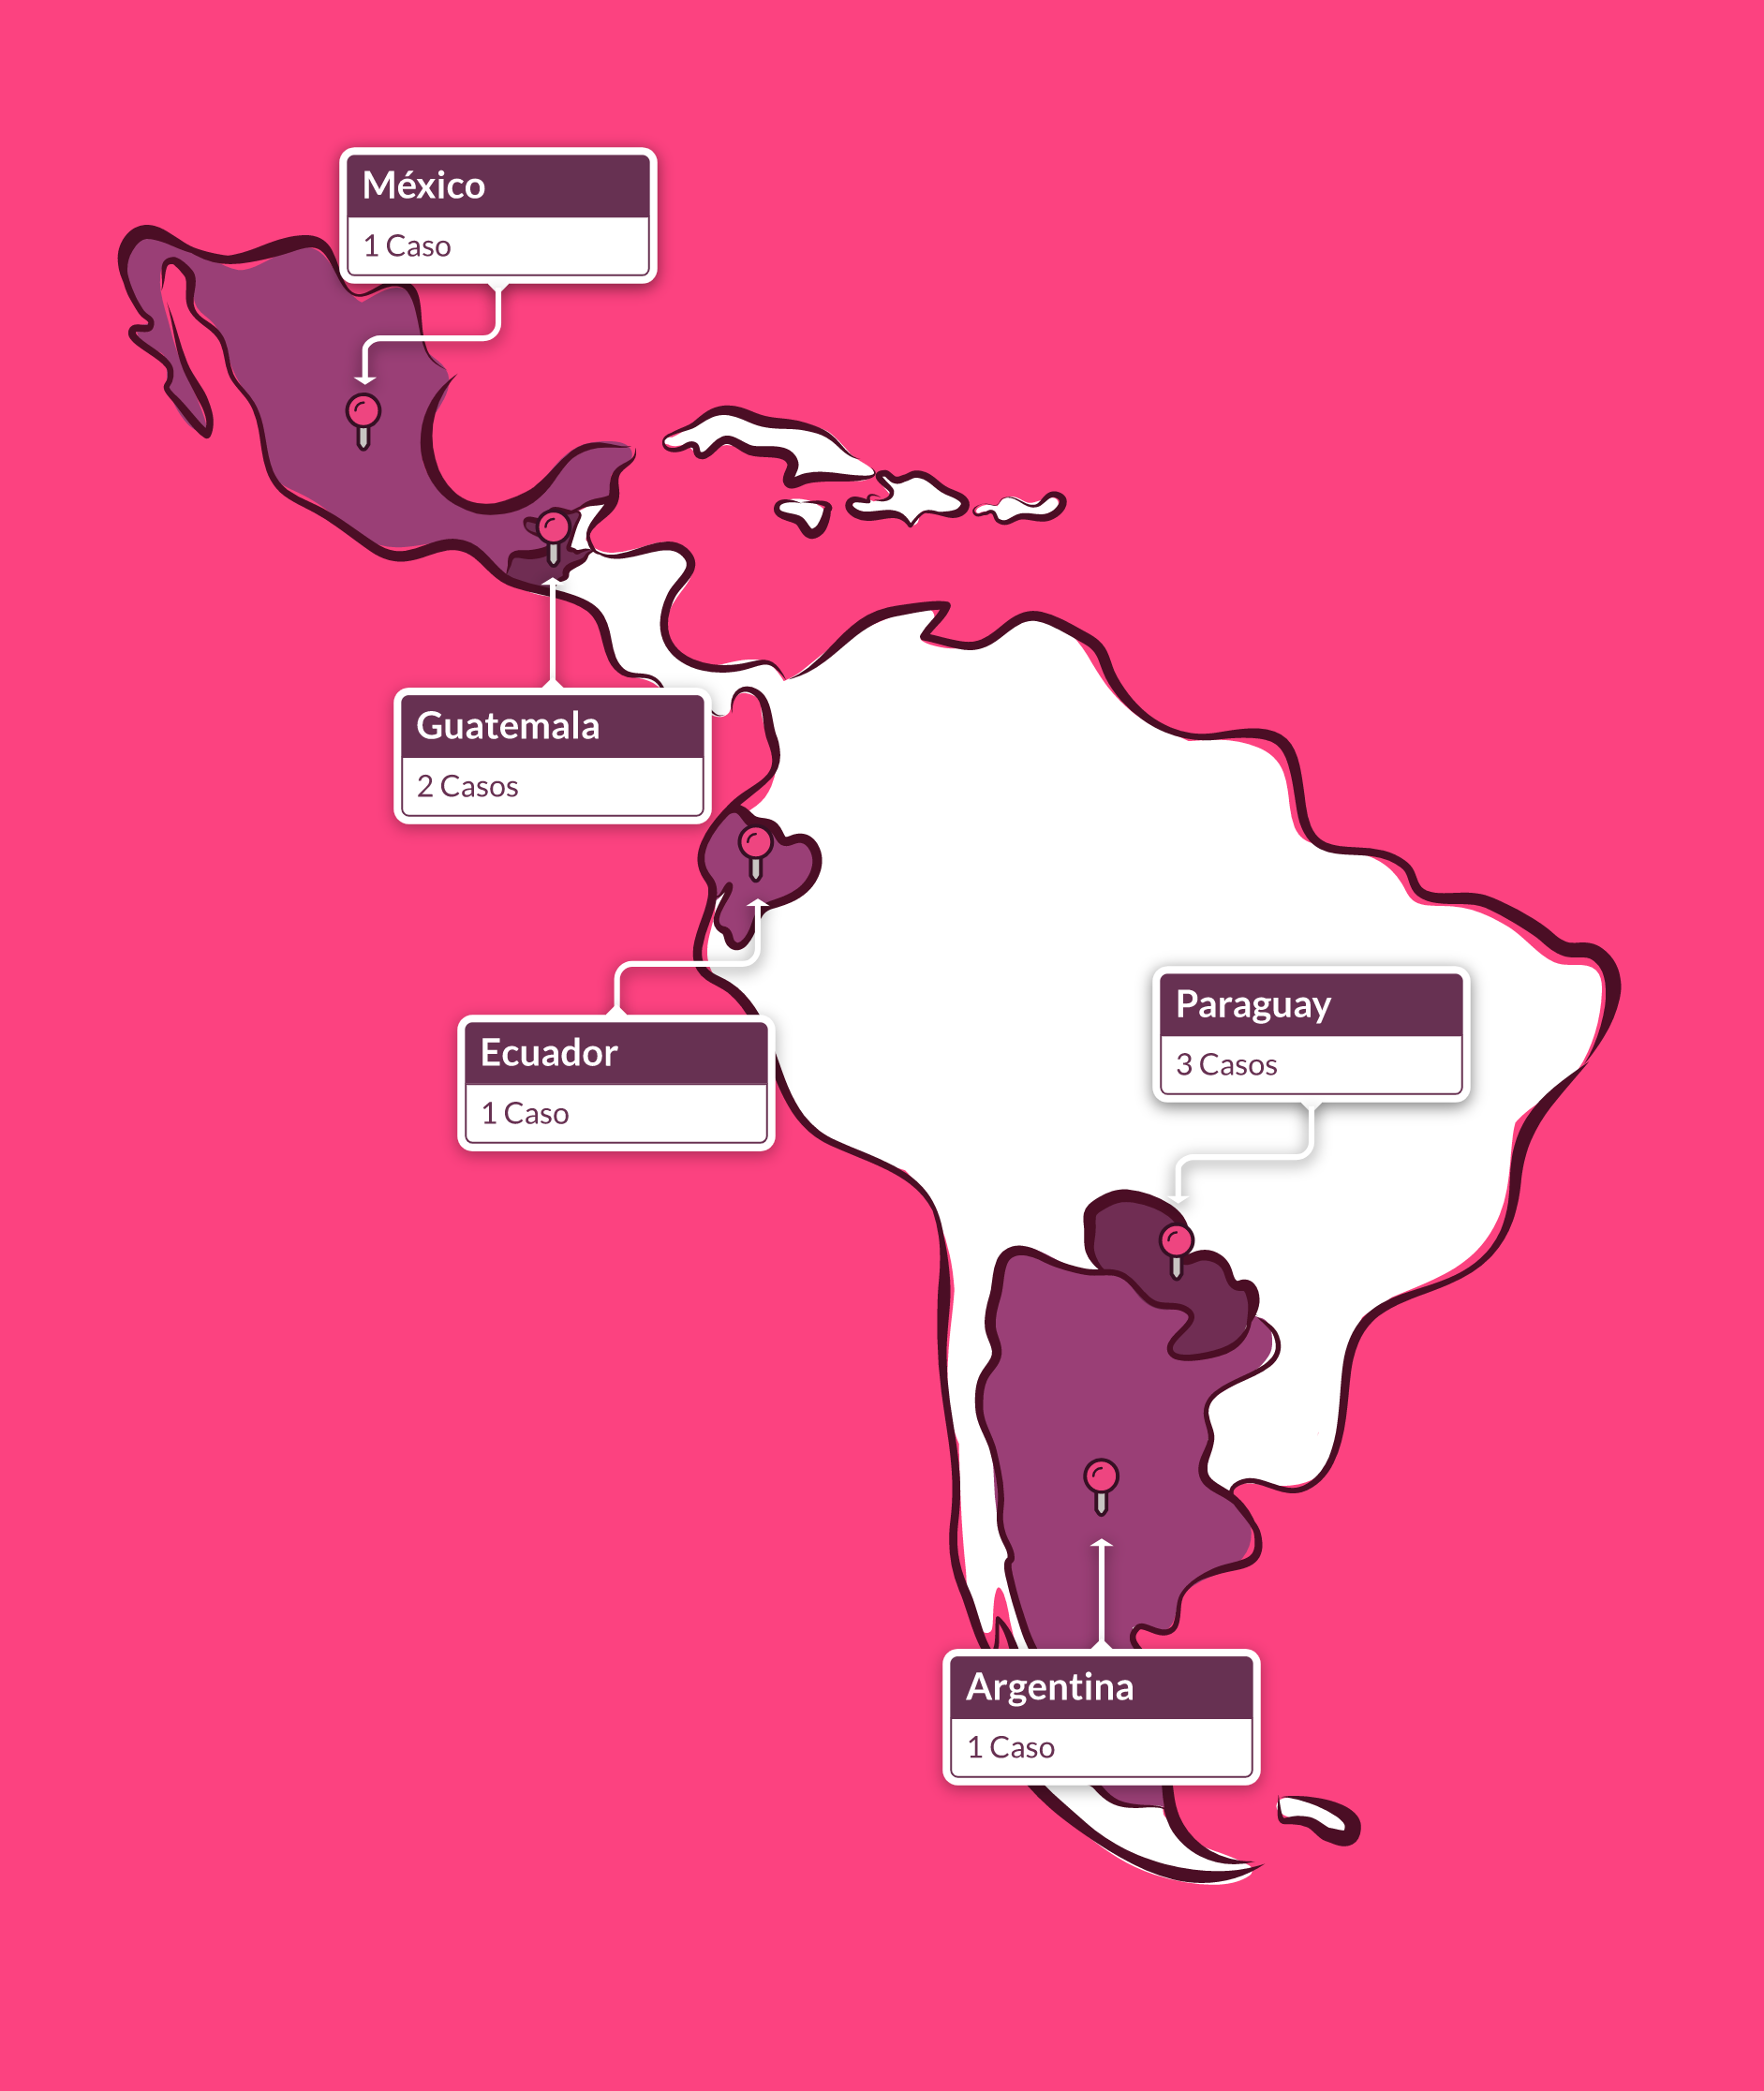 Silhouette of Latin America, with some countries highlighted in another color indicating the number of cases.